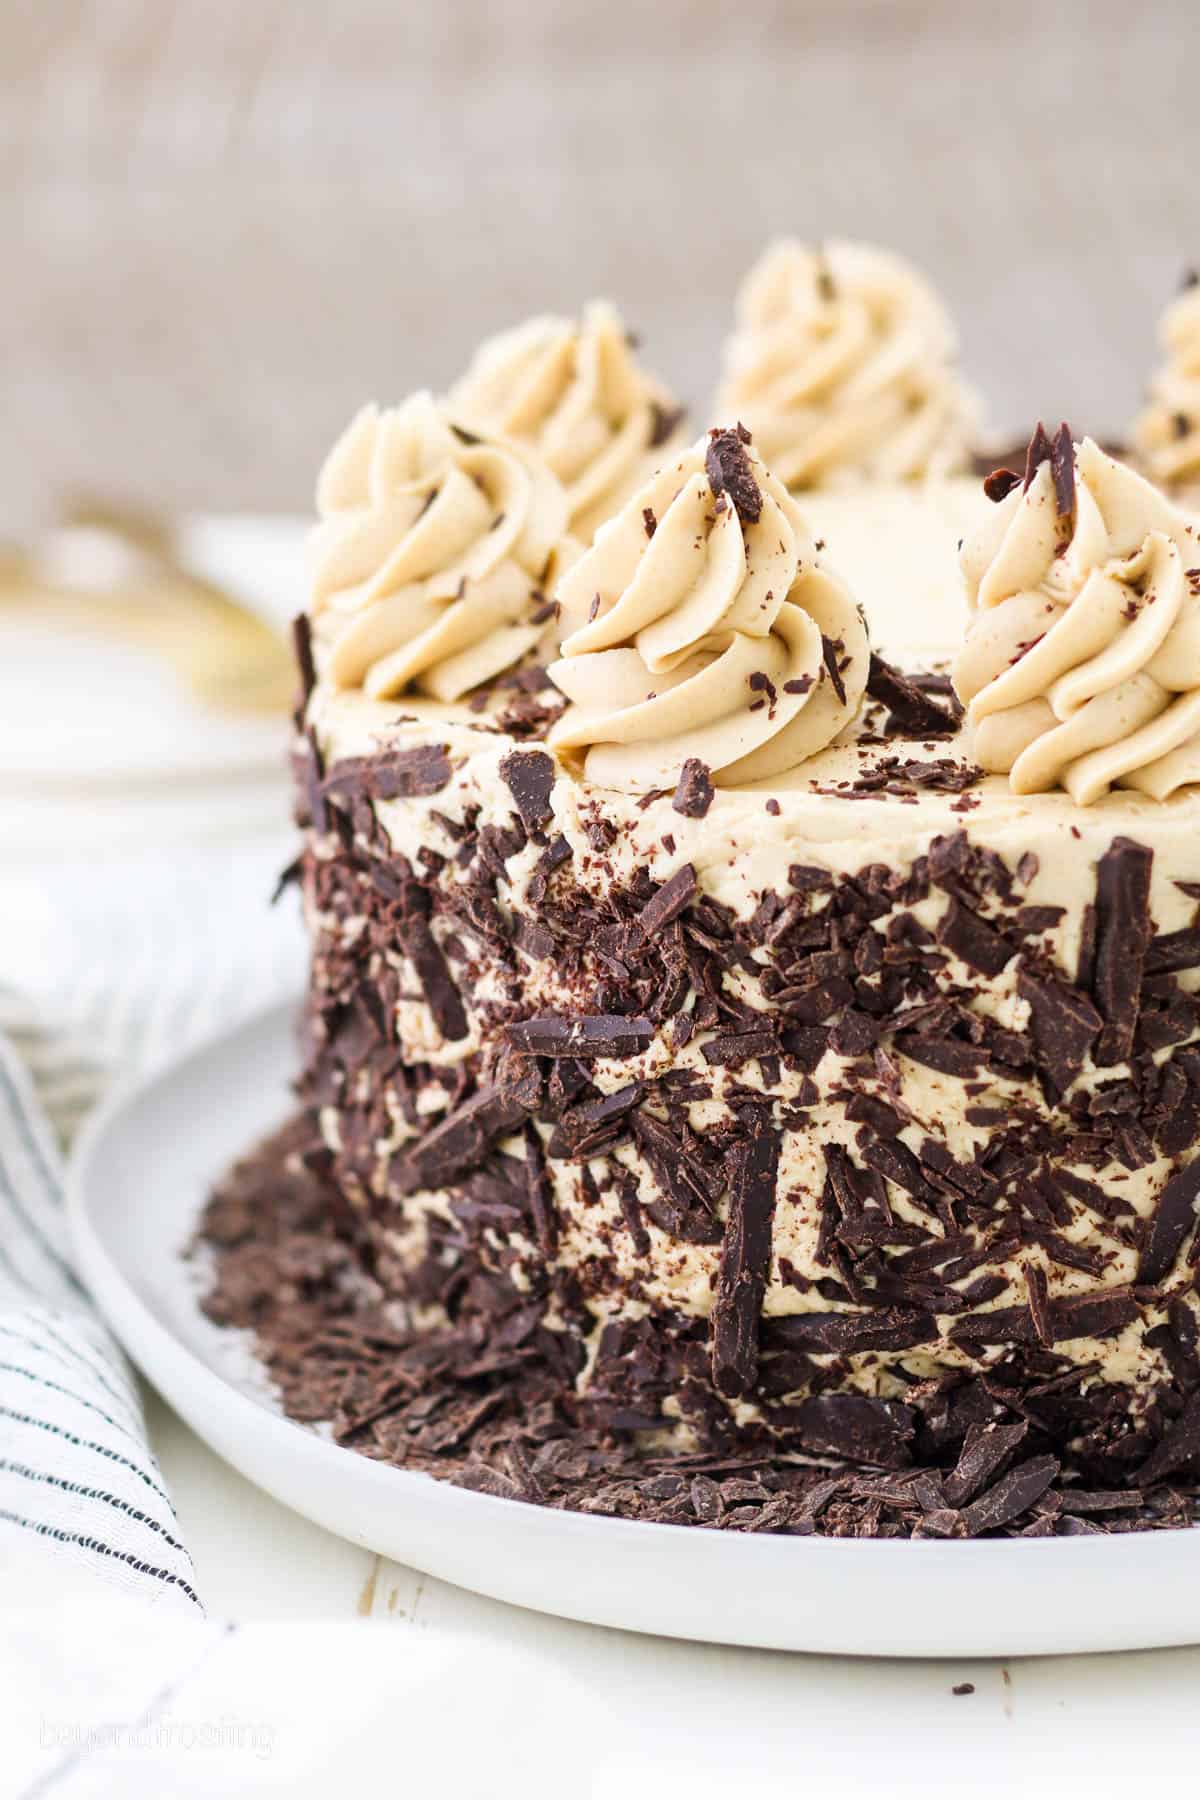 A frosted chocolate mocha cake decorated with shaved chocolate and mocha frosting swirls.